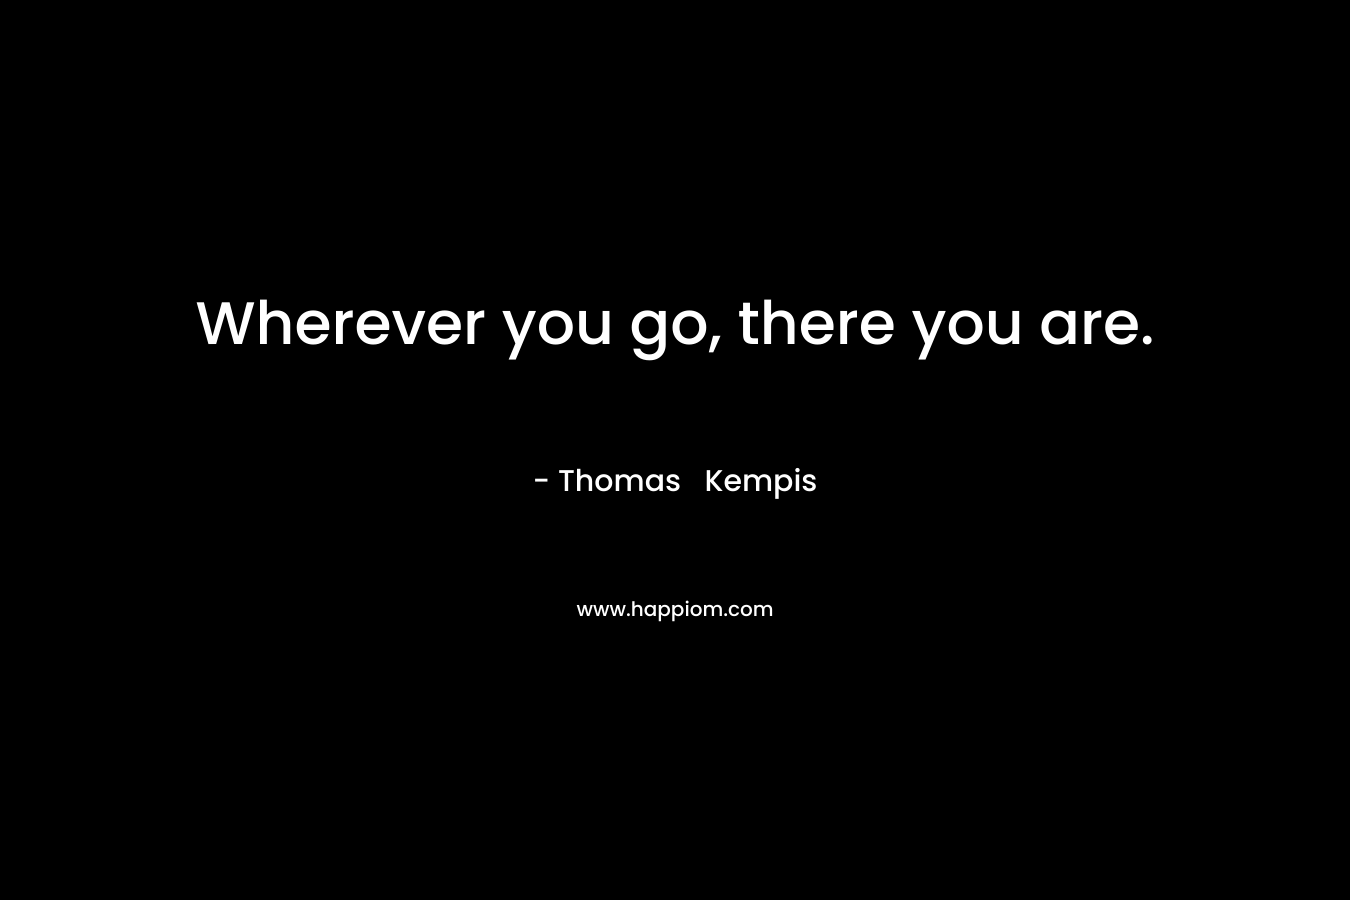 Wherever you go, there you are.